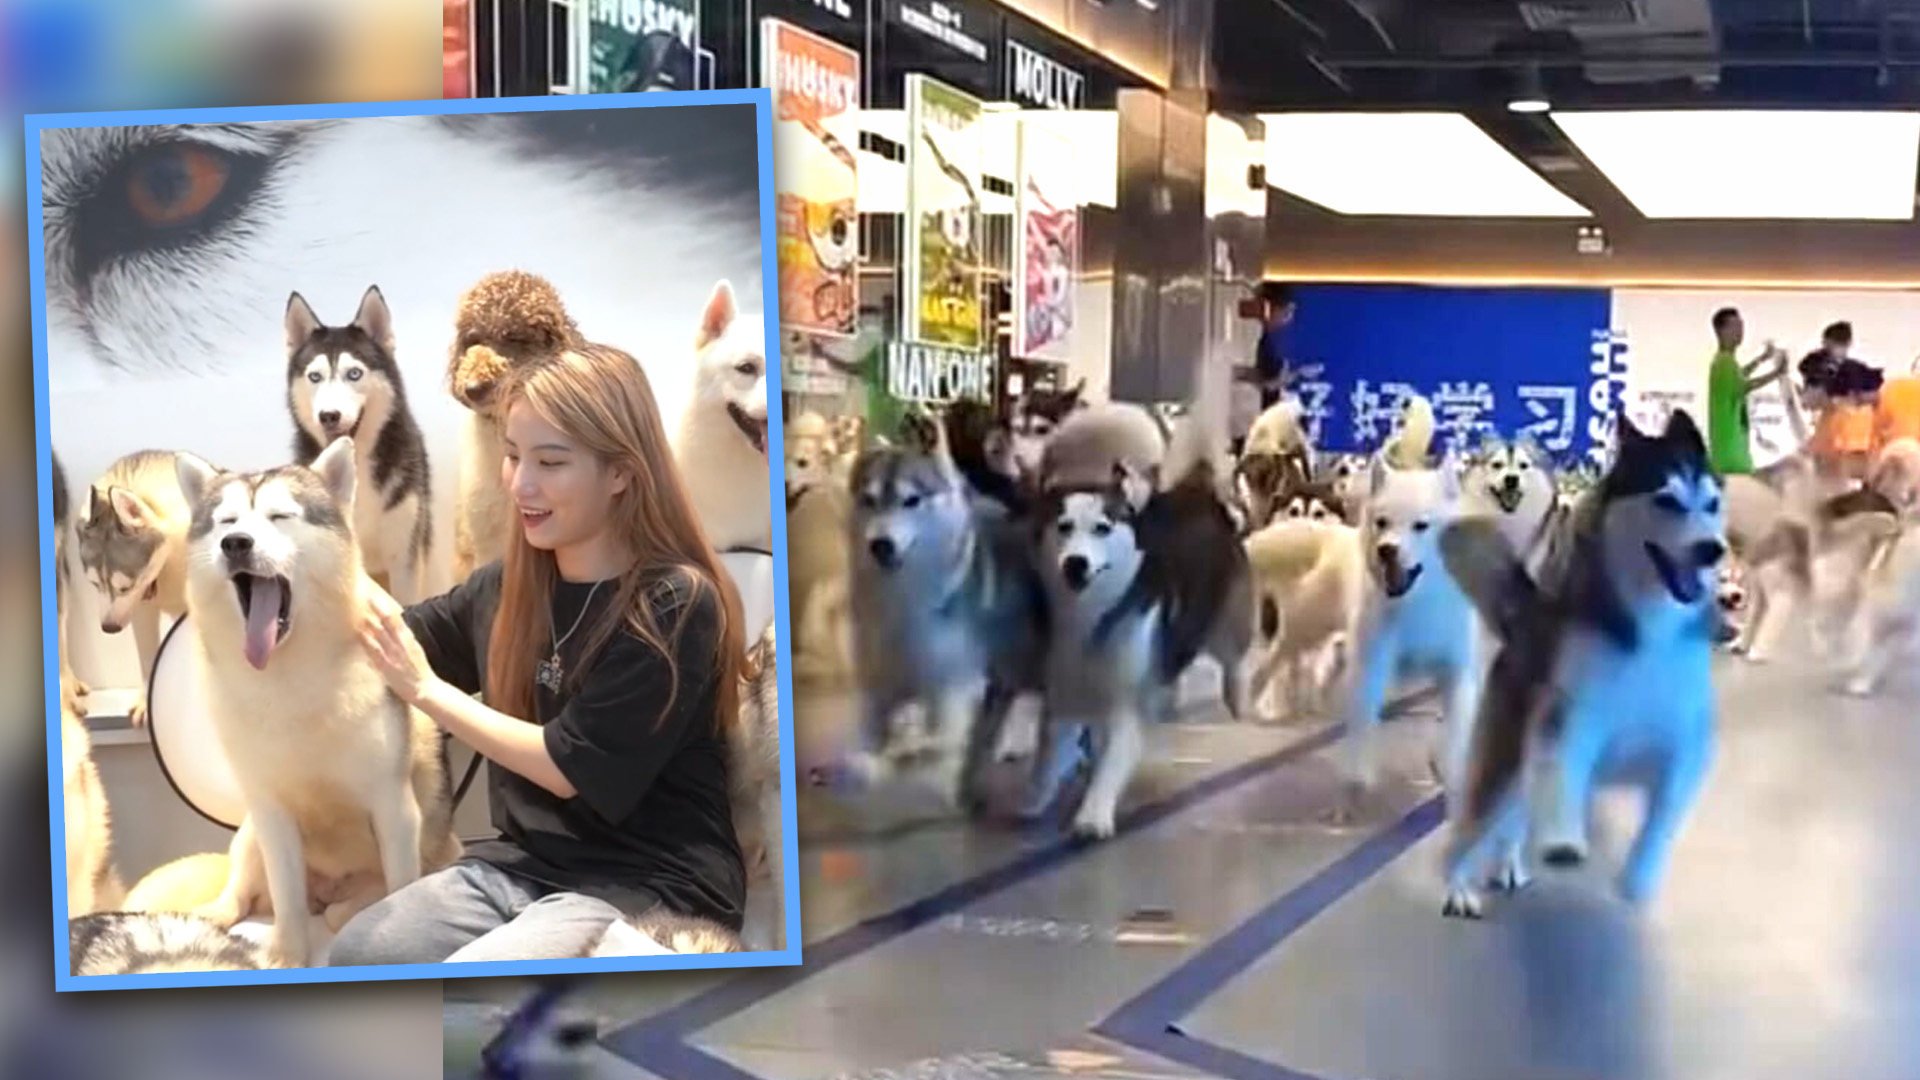 Scores of husky dogs escaped from a pet cafe in China when a customer left the door open, delighting mainland social media. Photo: SCMP composite/Douyin